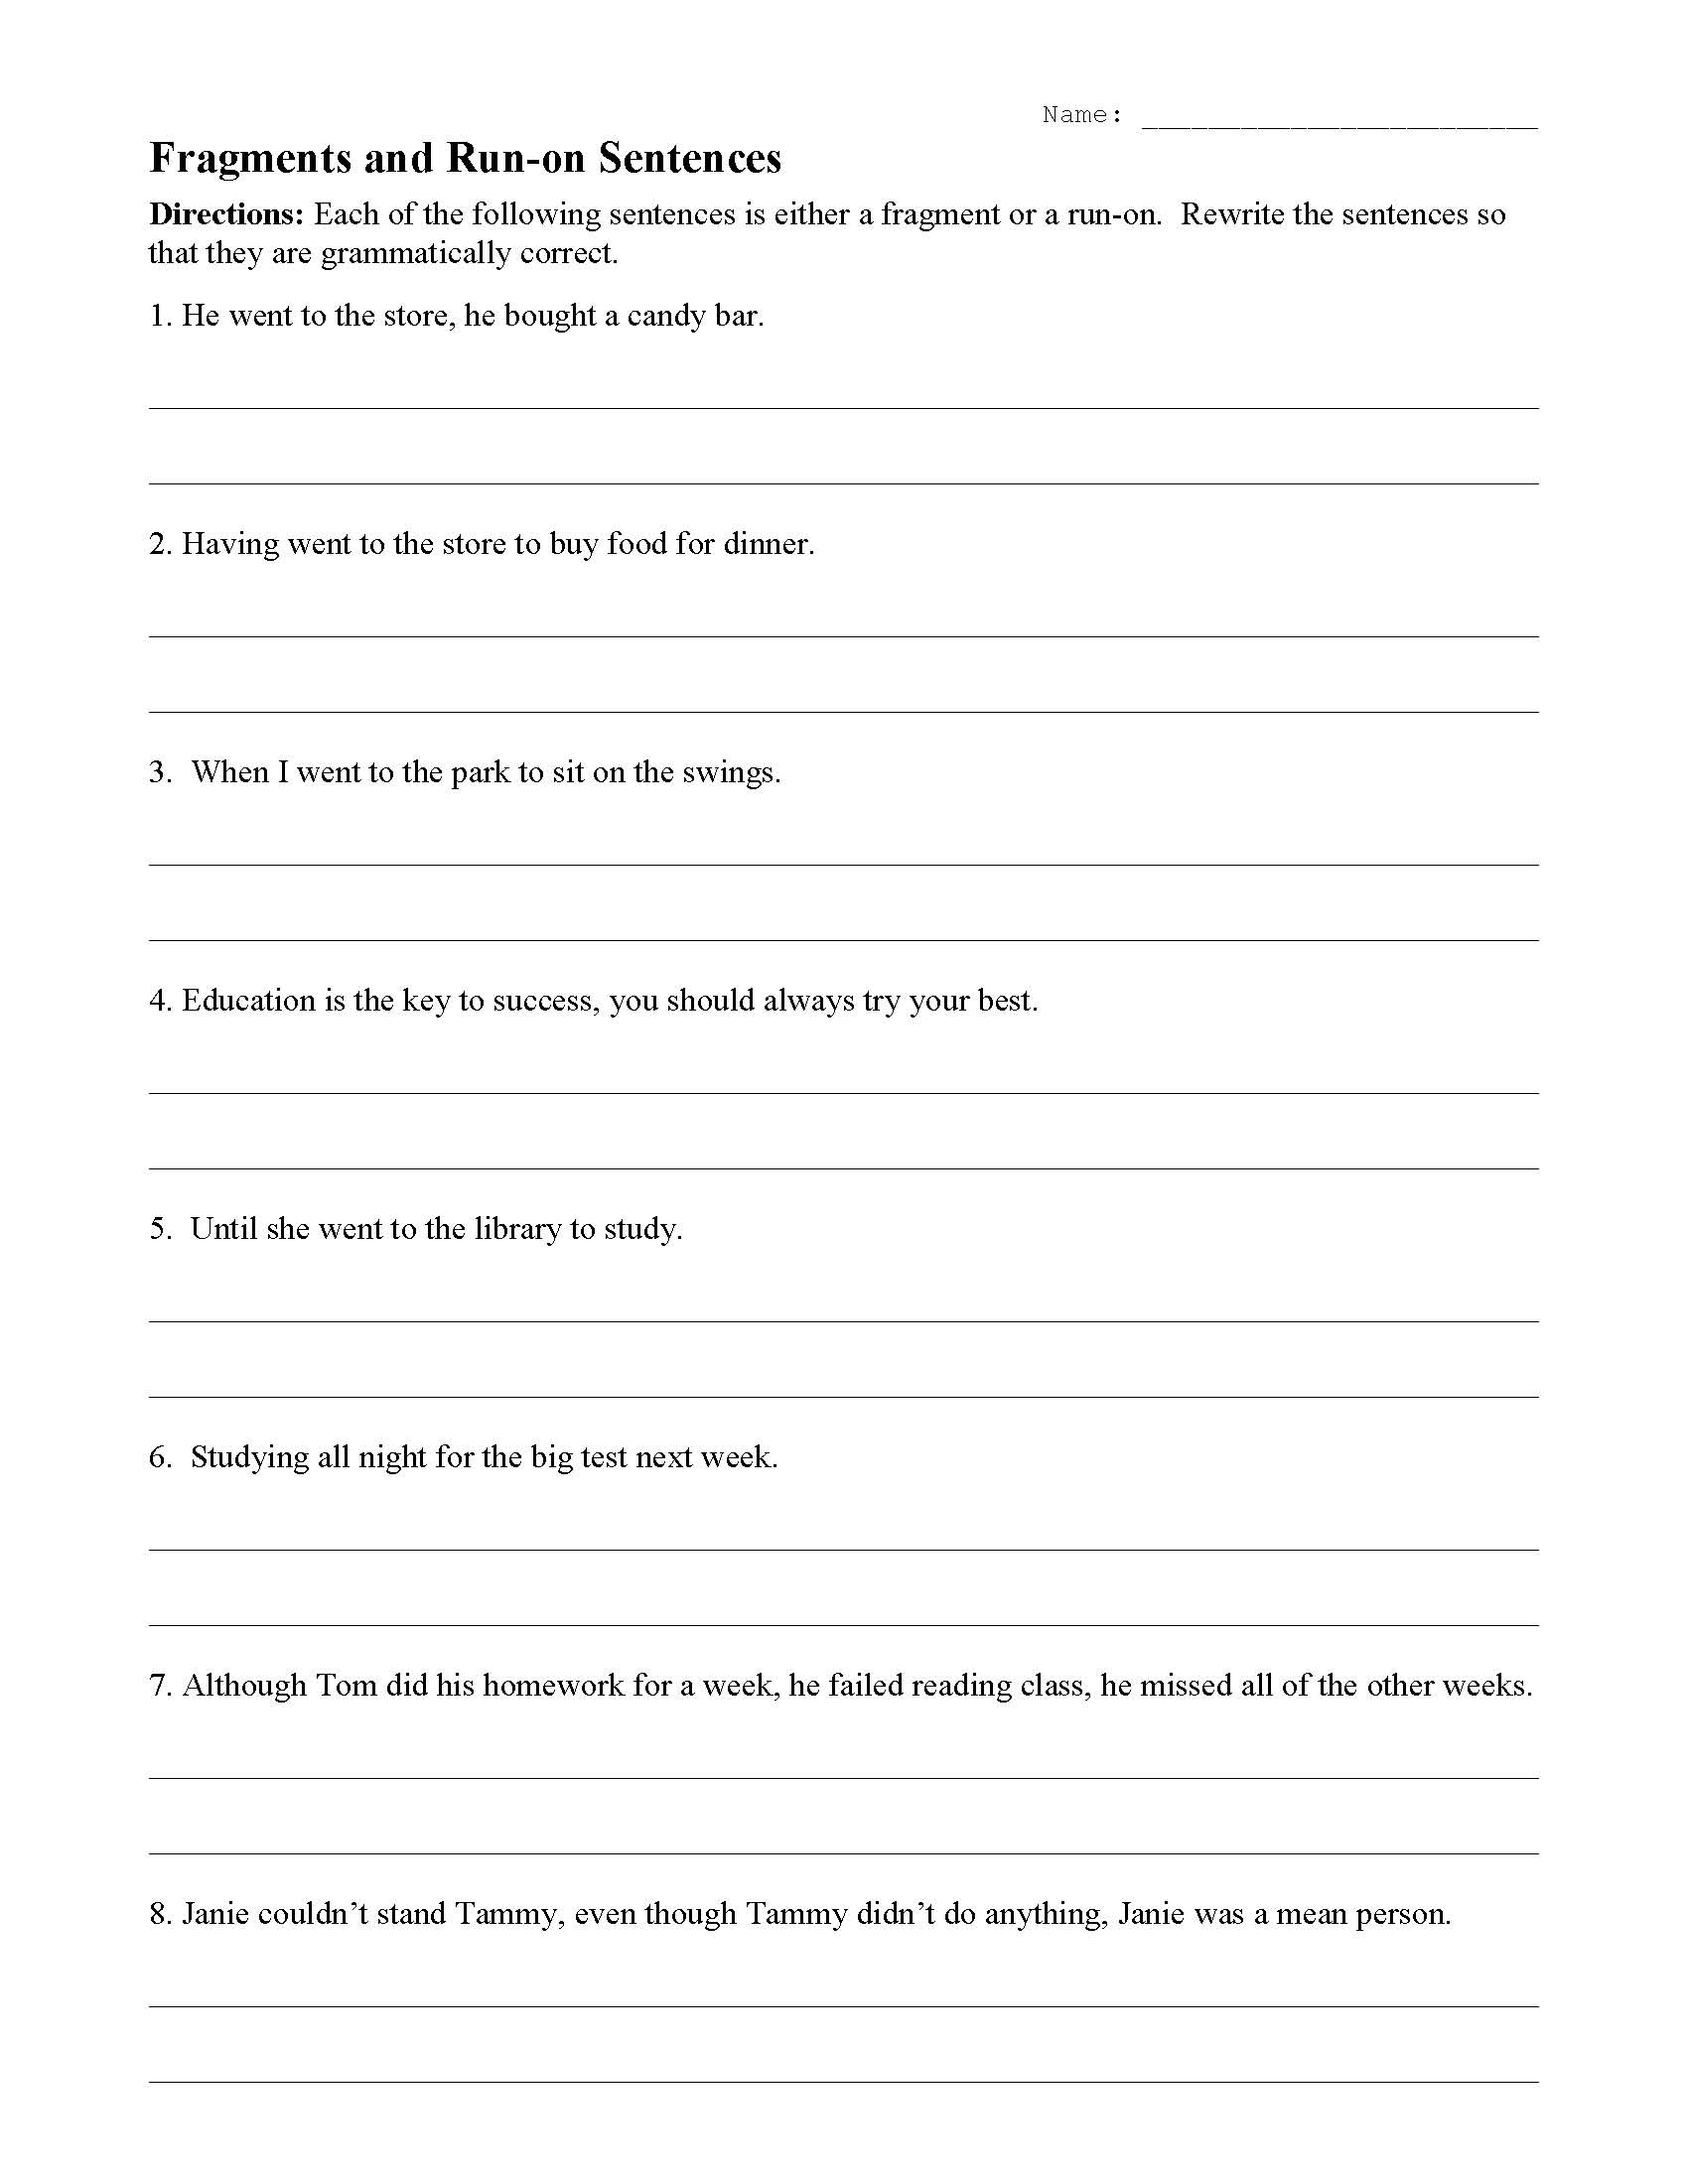 Fragments and Run-On Sentences Worksheet  Sentence Structure Activity With Run On Sentence Worksheet